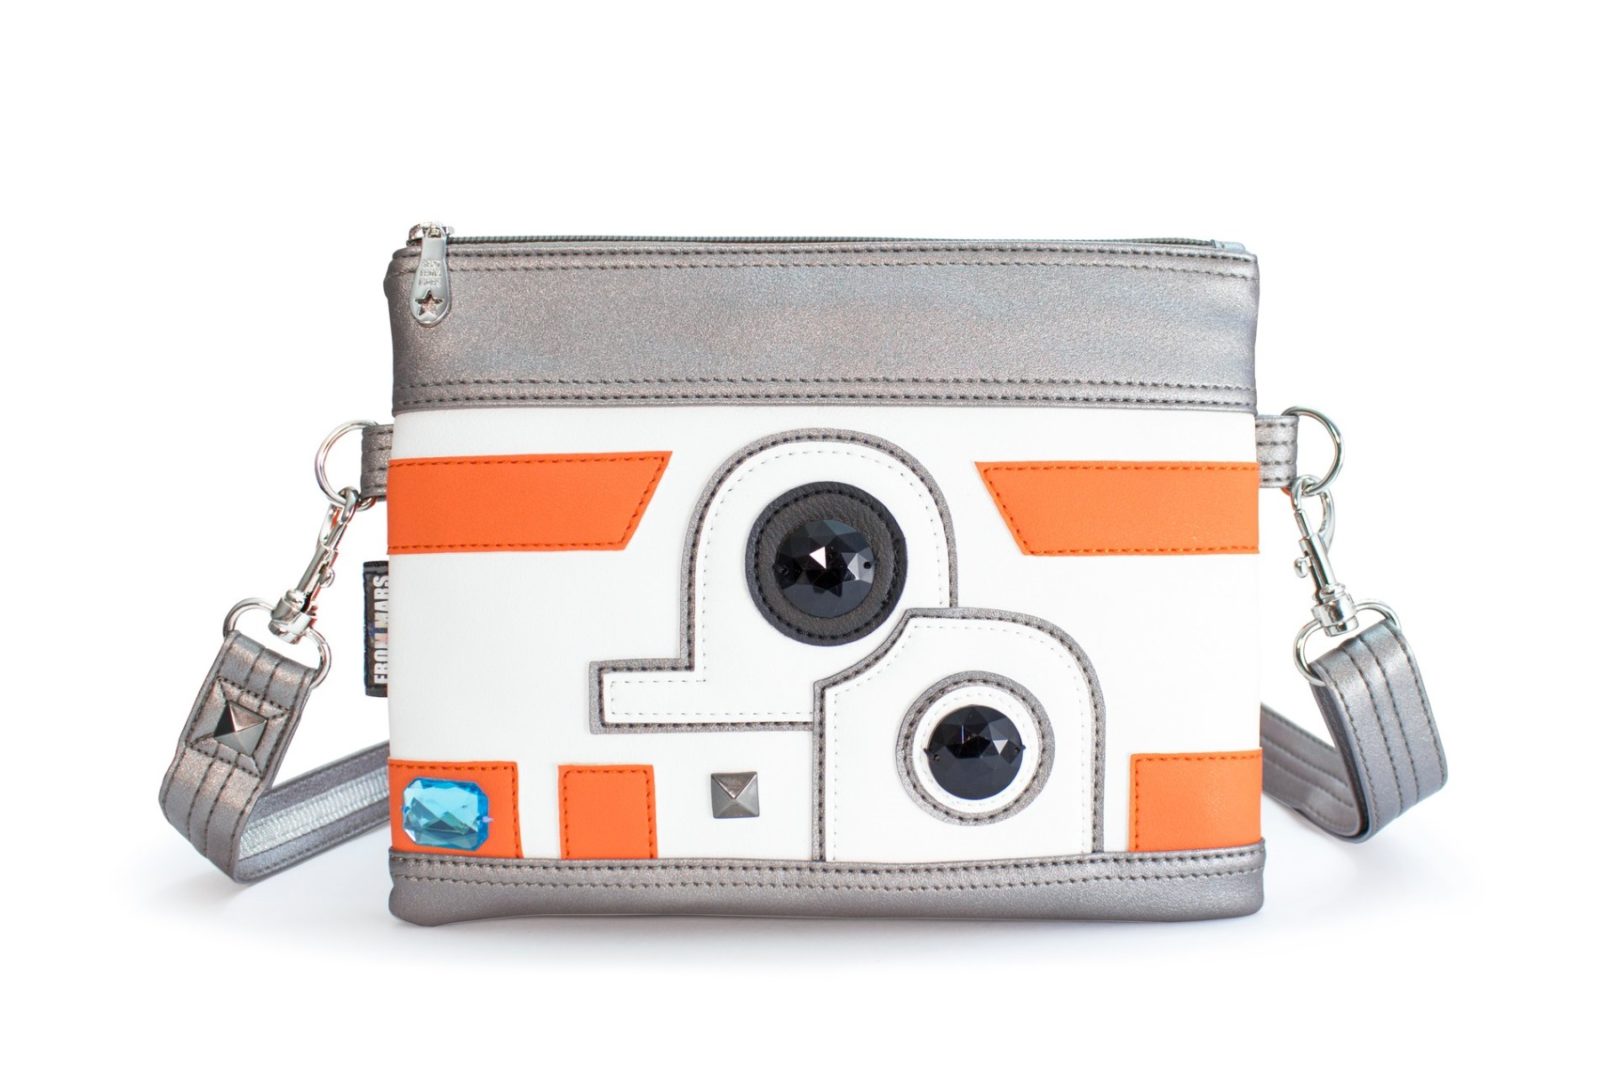 BB-8 Inspired Purse by Sent From Mars